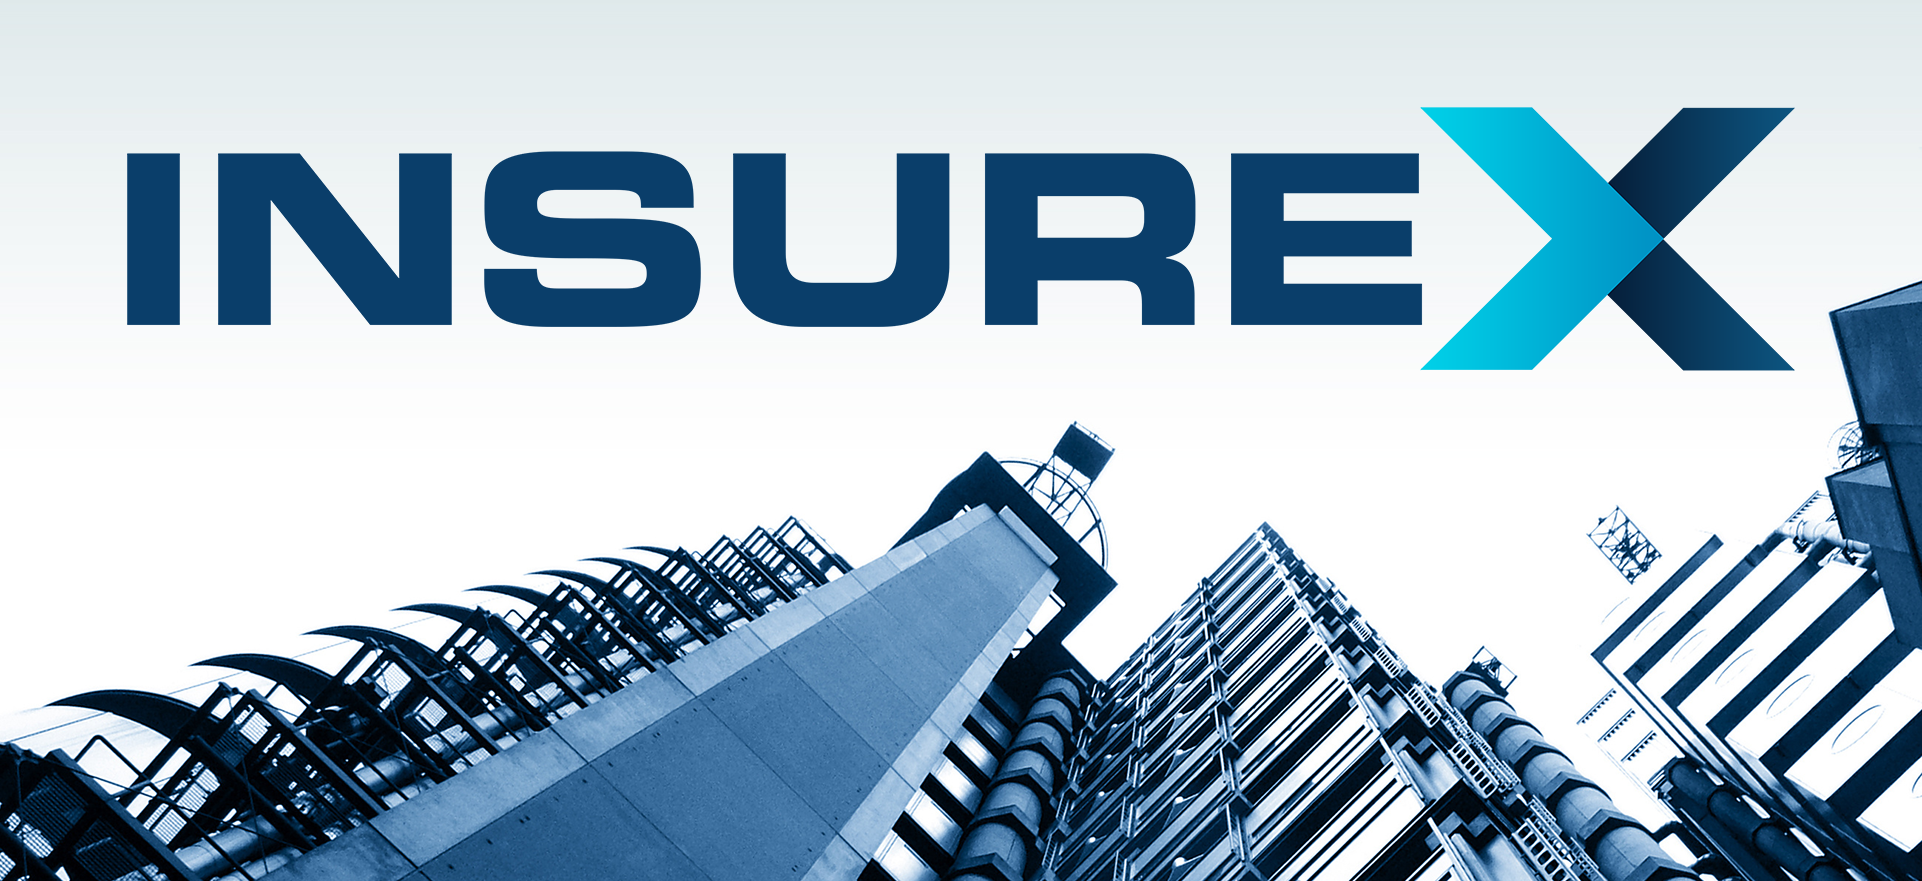 Insurex Announce Crowdsale for Blockchain-Based Marketplace for Insurance Products